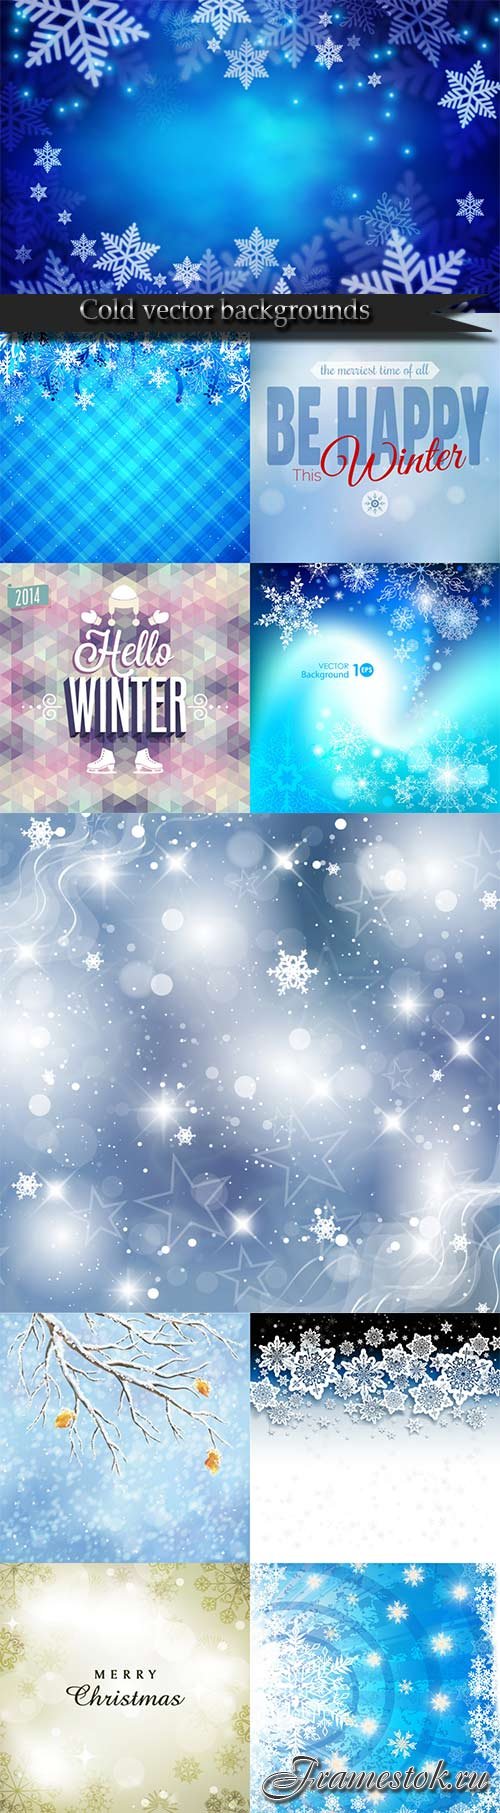 Cold vector backgrounds